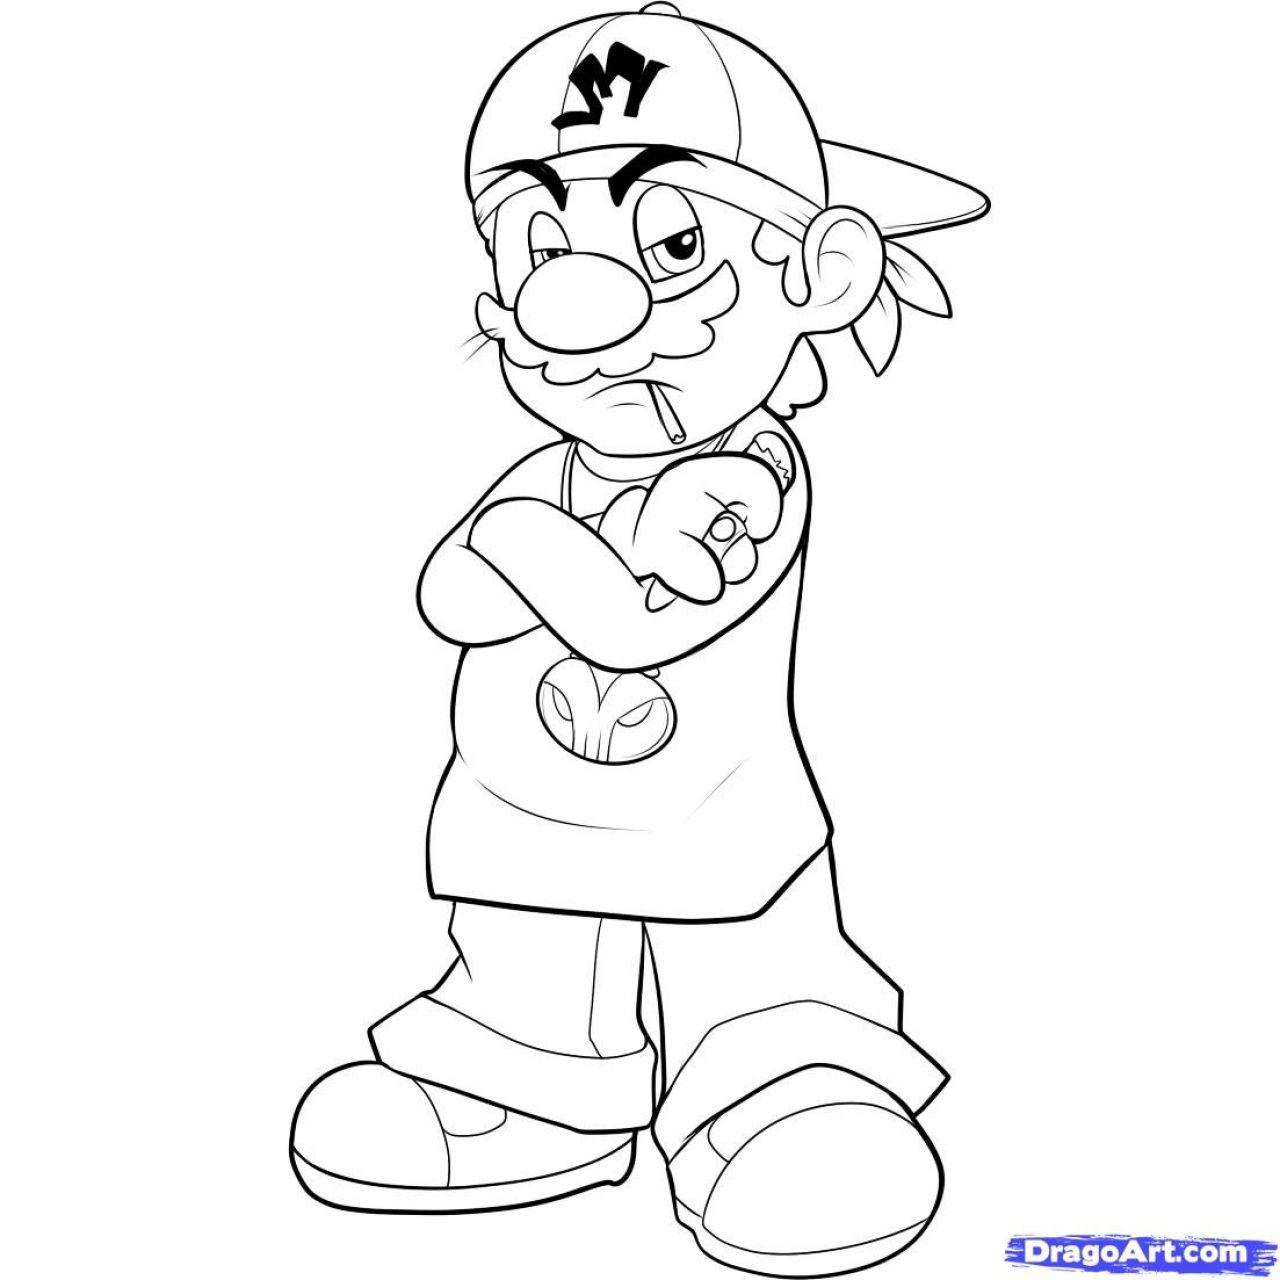 Cartoon Thug Drawings Easy Cartoon Characters To Draw Background